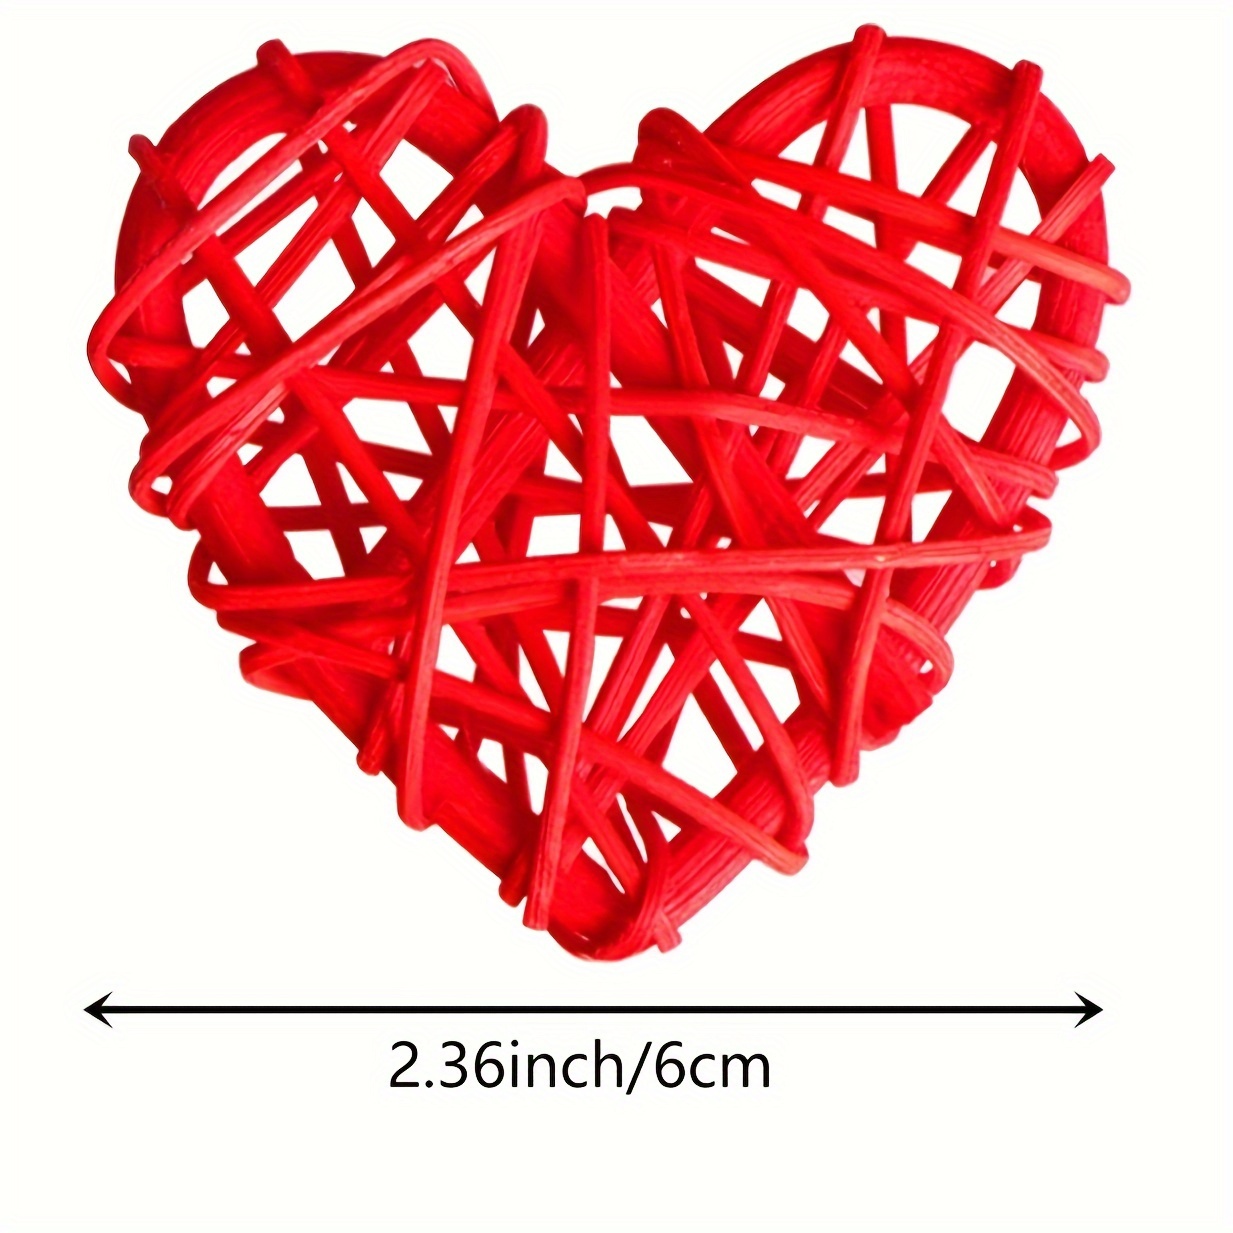 Geosar 24 Pieces Heart Rattan Balls, Valentines Day Rattan Balls Natural  Wicker Heart Shaped Balls 4 Colors for Valentine's Day Wedding DIY Craft  Home